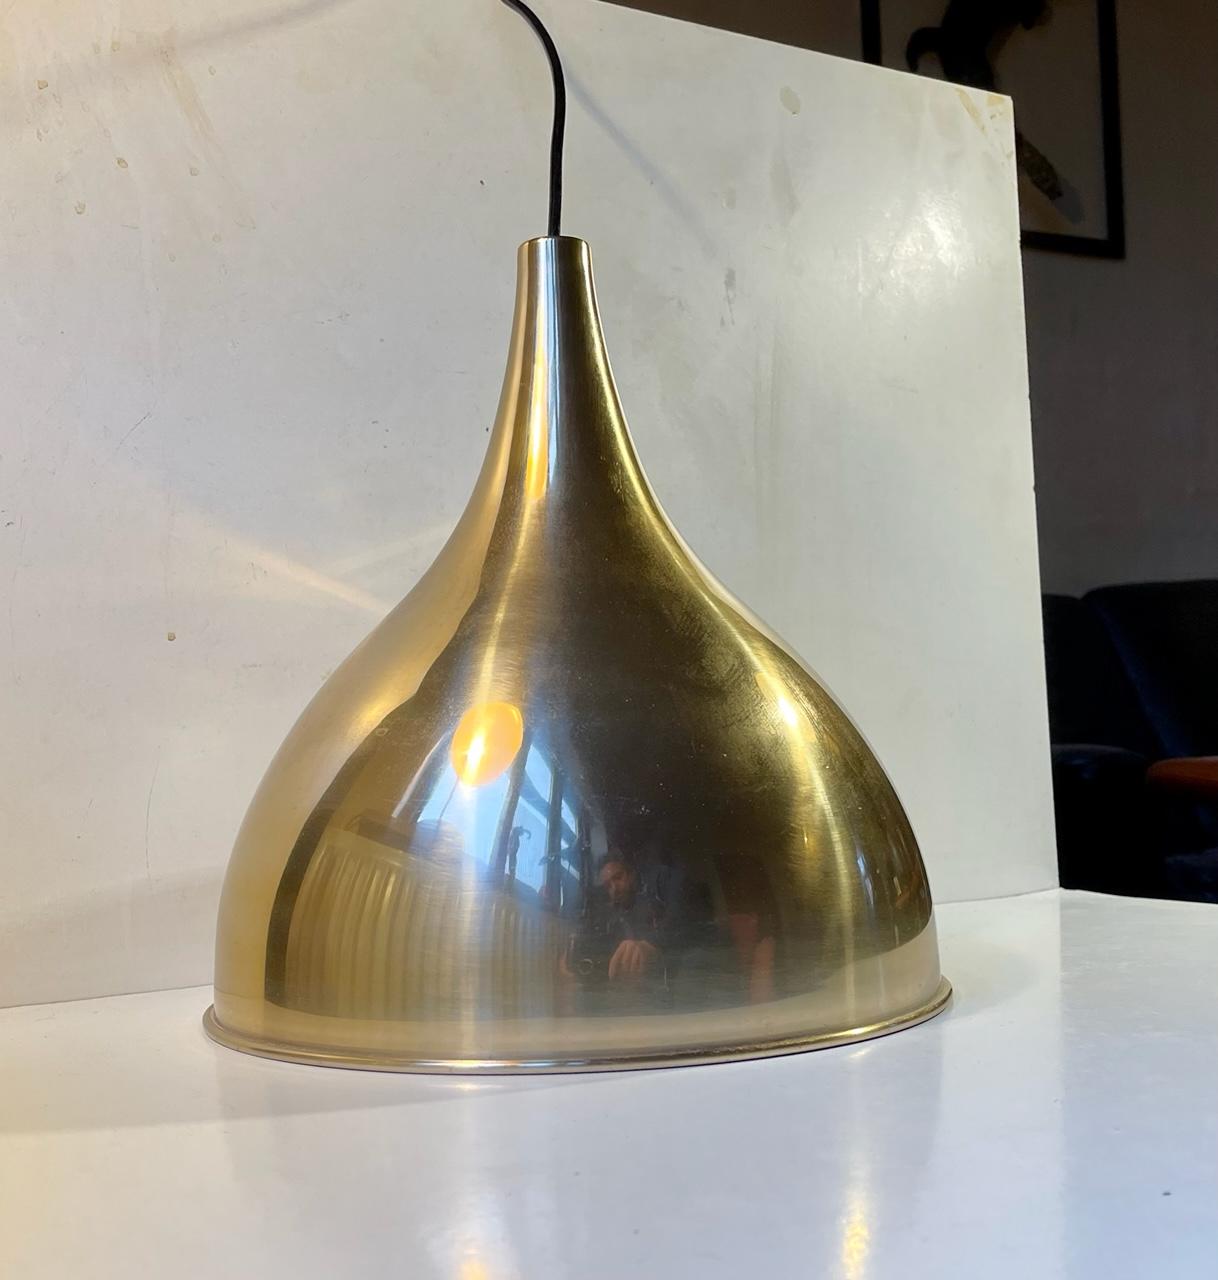 A large 'Silhuet 2' pendant lamp by Jo Hammerborg. Organically-shaped aluminium shade alloyed with brass. Manufactured by Fog & Mørup in Denmark circa 1970-75. Measurements: Height: 32 cm, Diameter 29.5 cm.